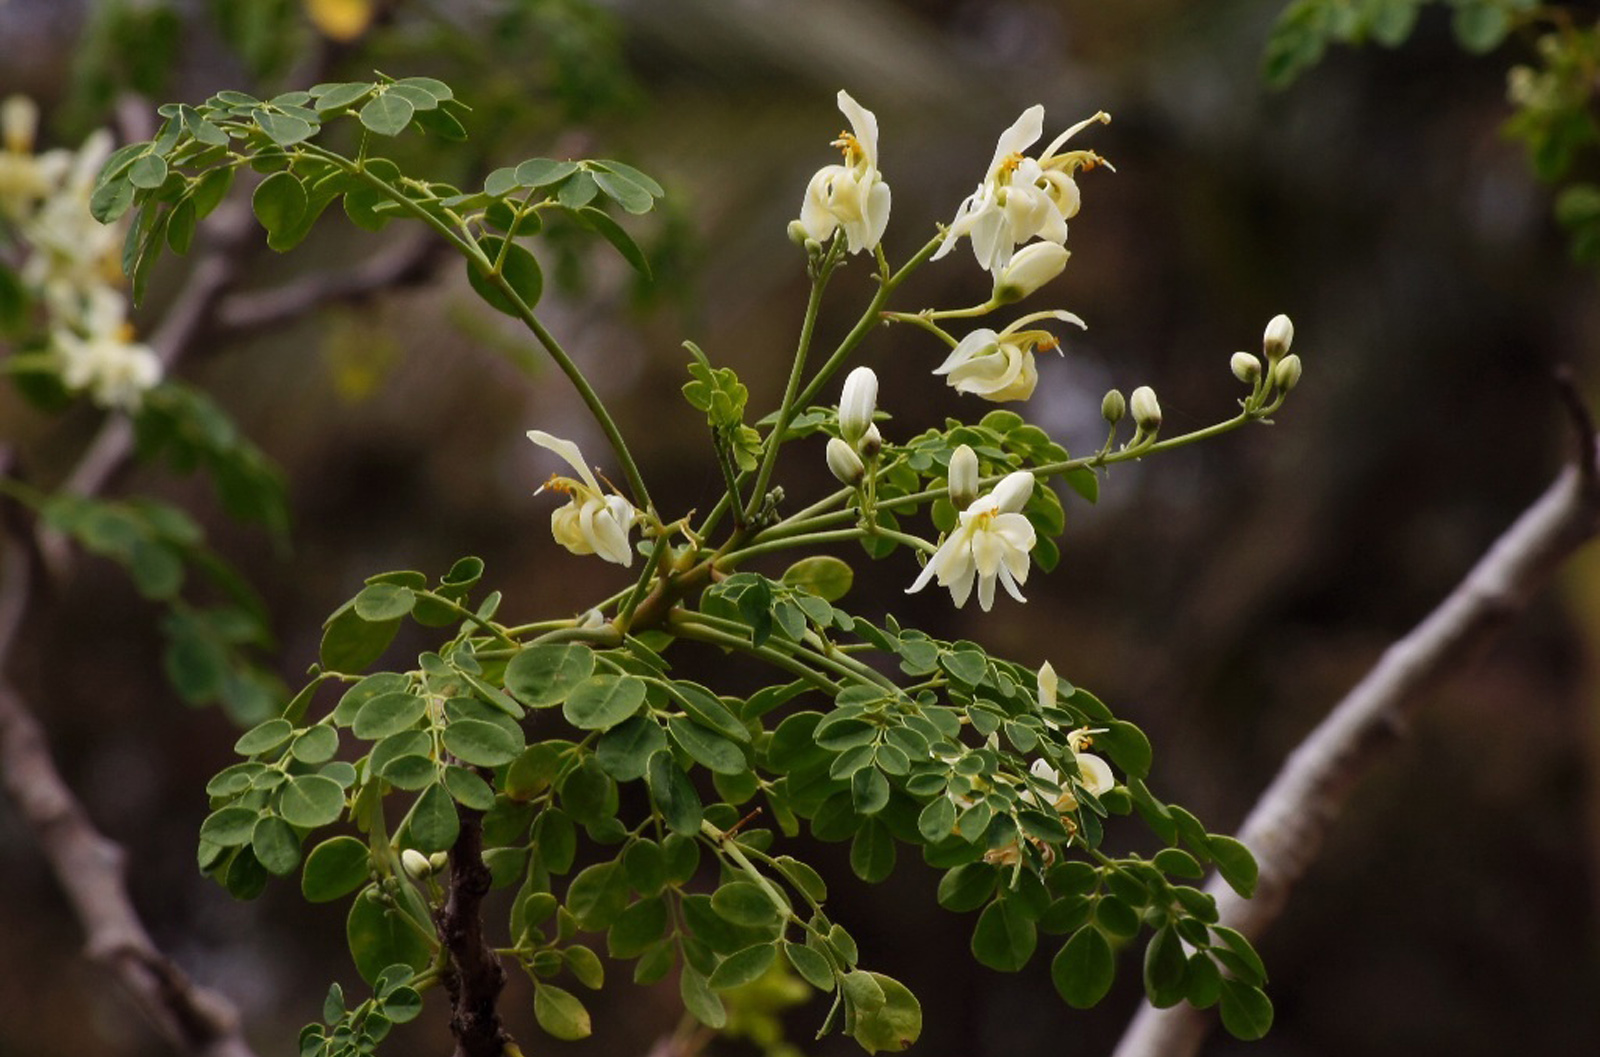 All About Moringa: The Uber Nutritious Superfood That Could Combat Malnutrition